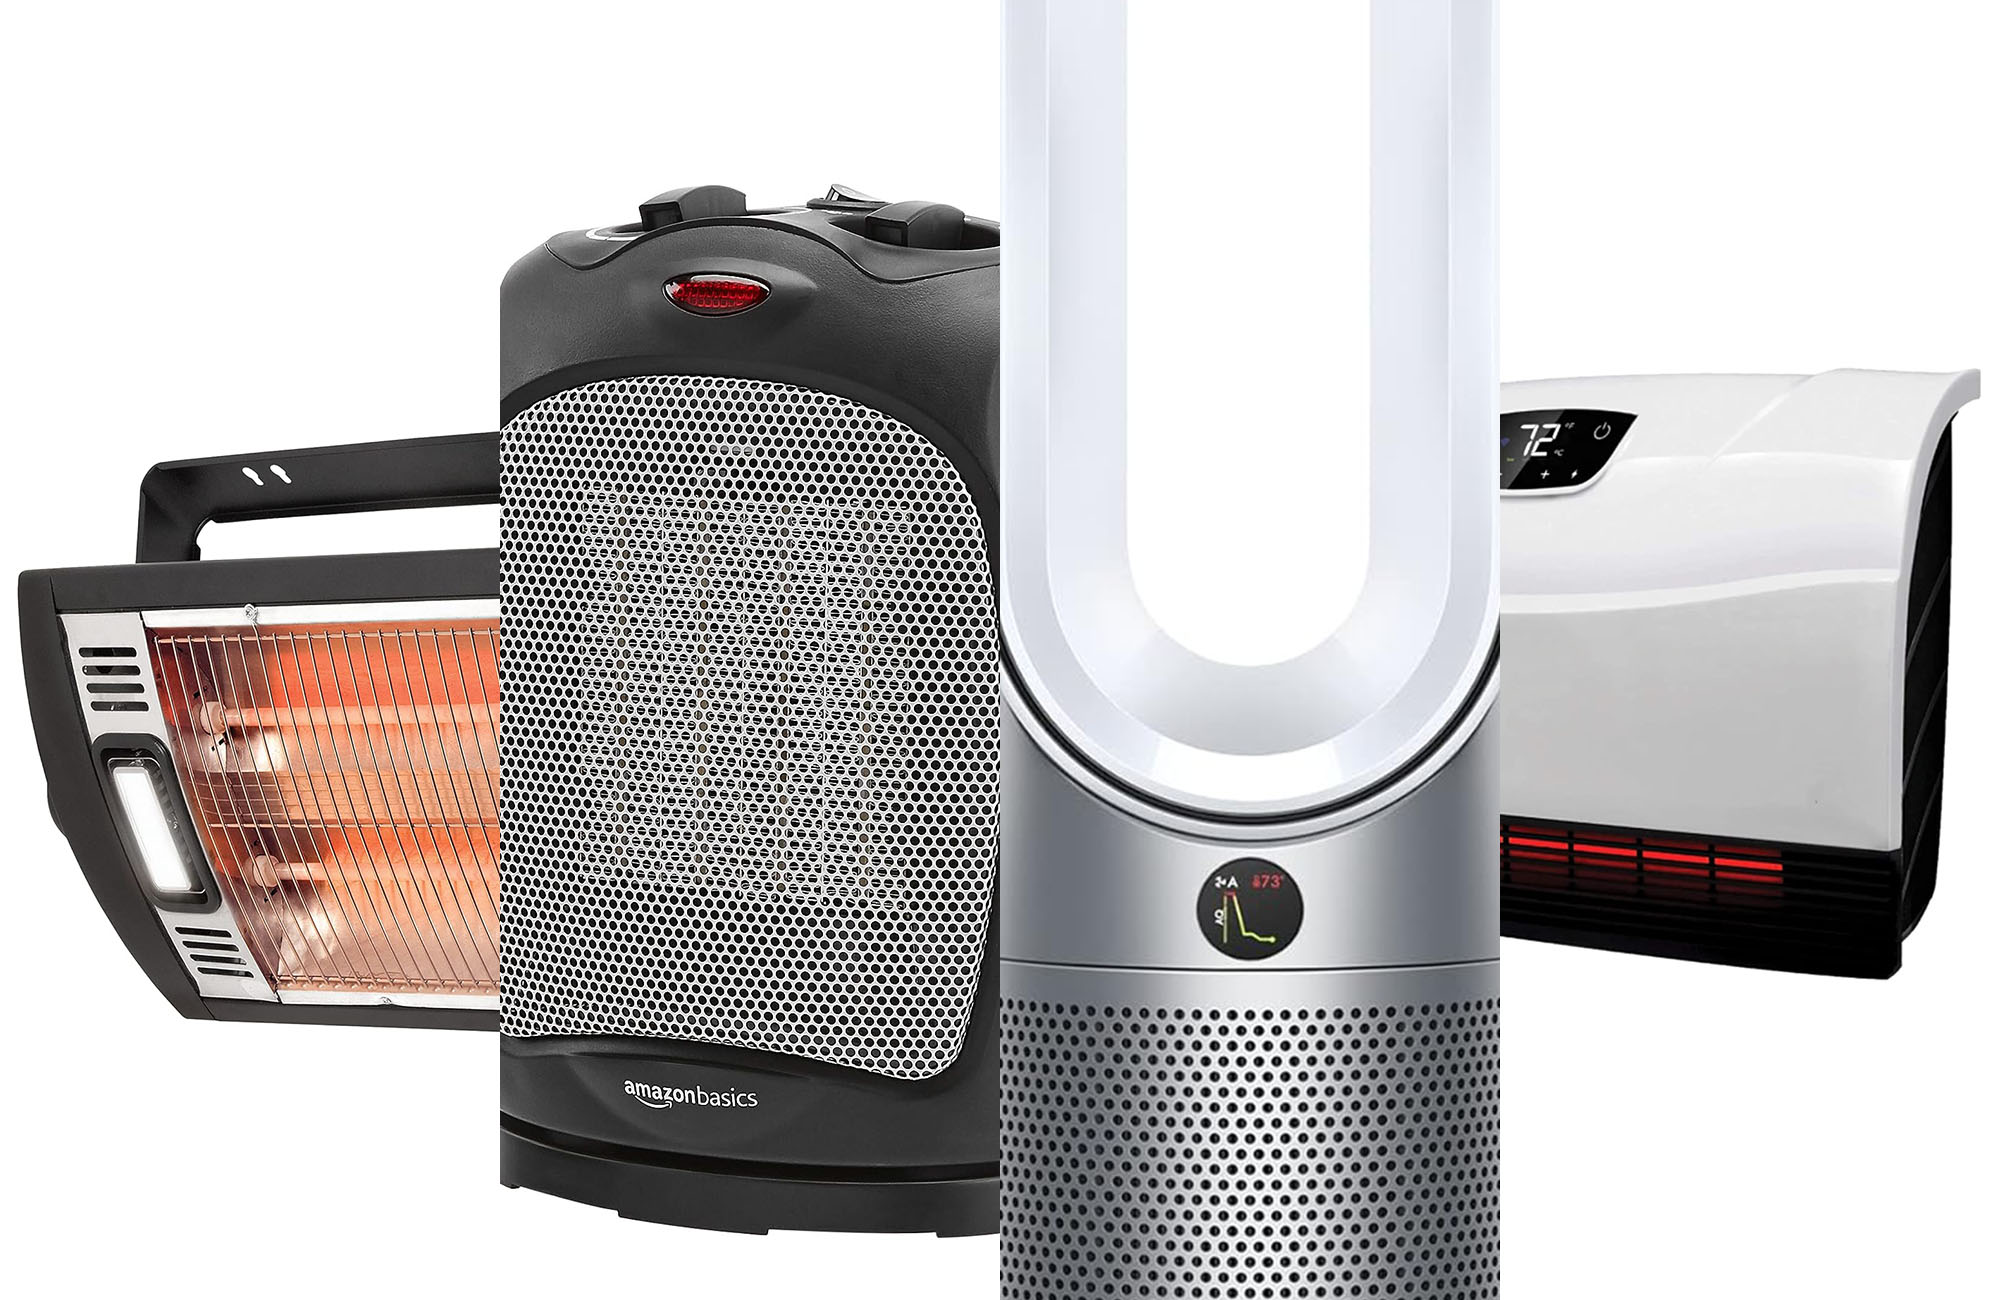 6 best affordable space heaters under $50